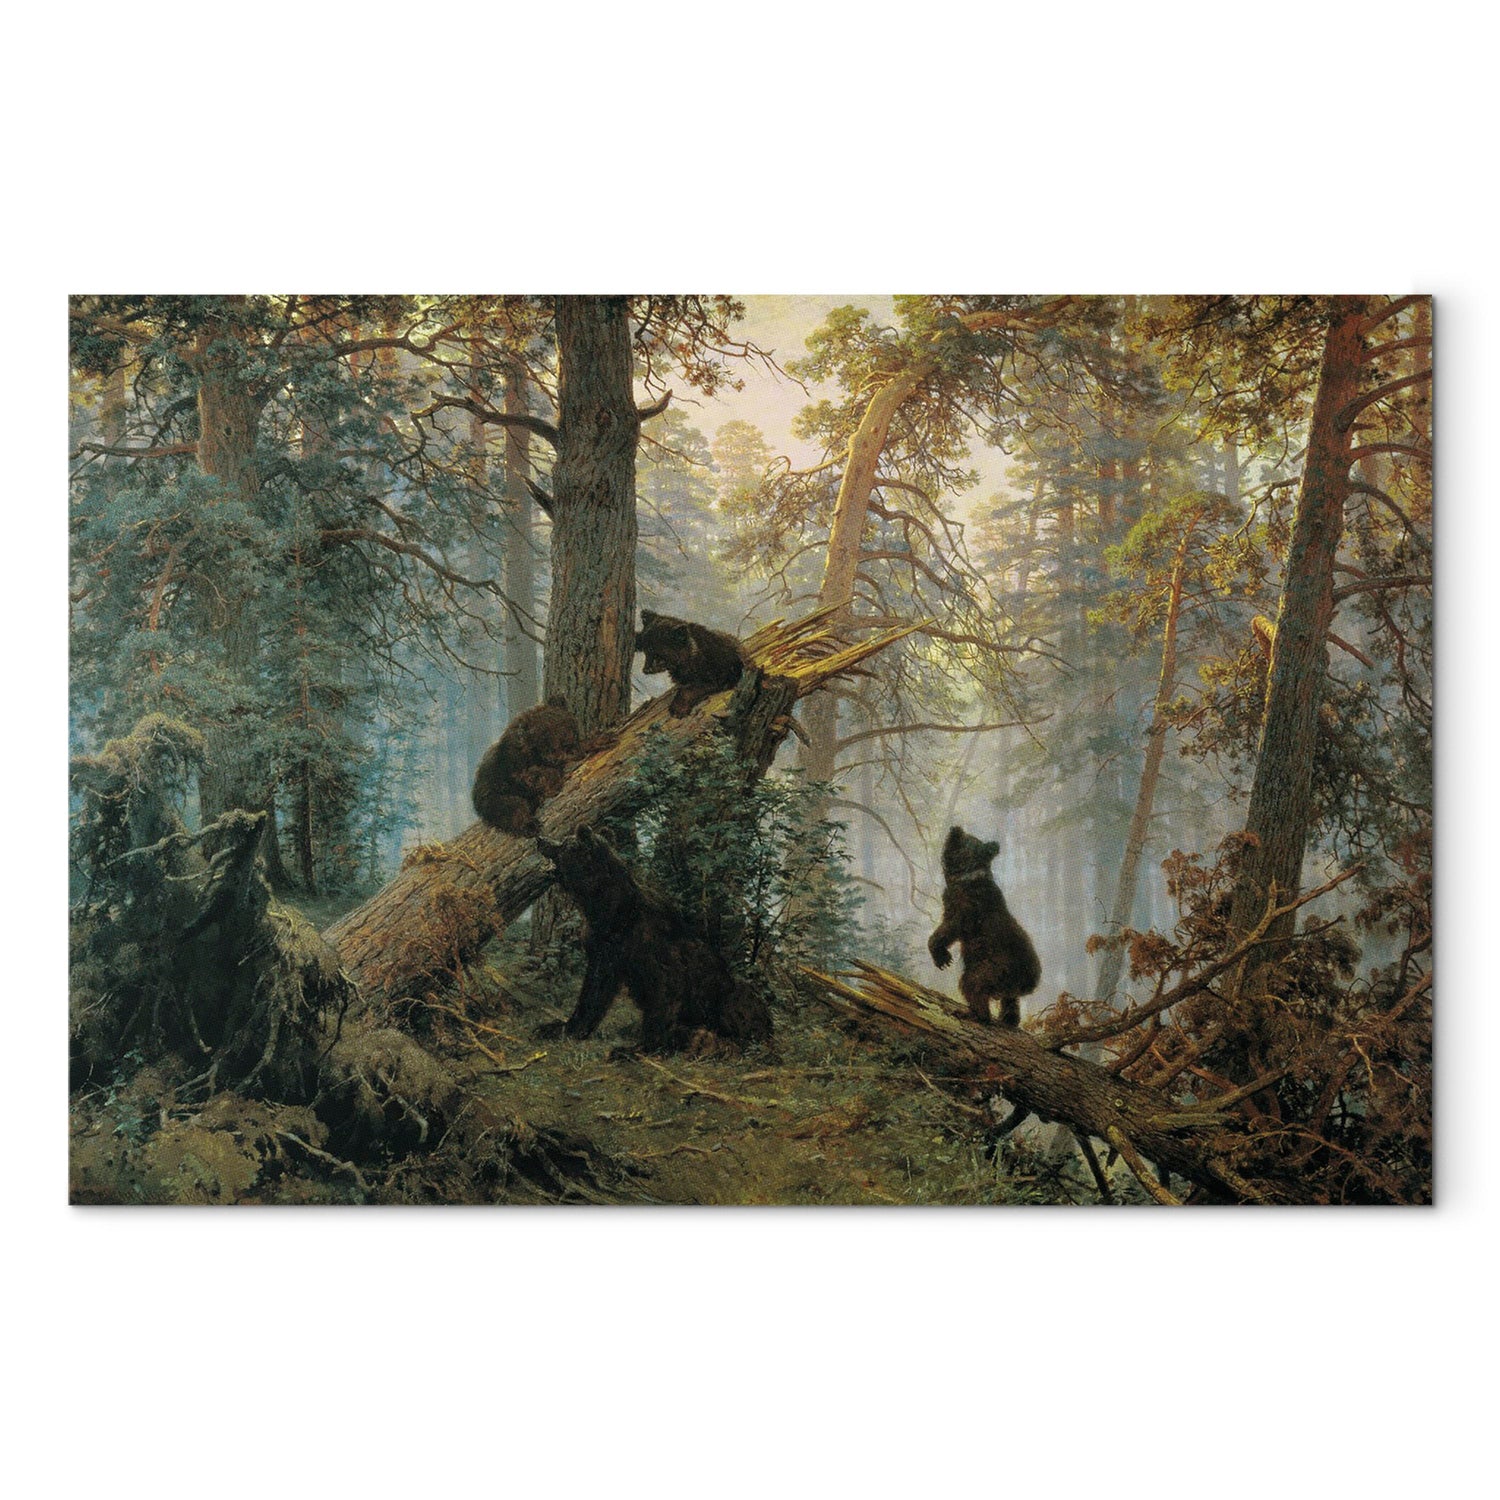 Reproduction Canvas Wall Art - Morning in a Pine Forest